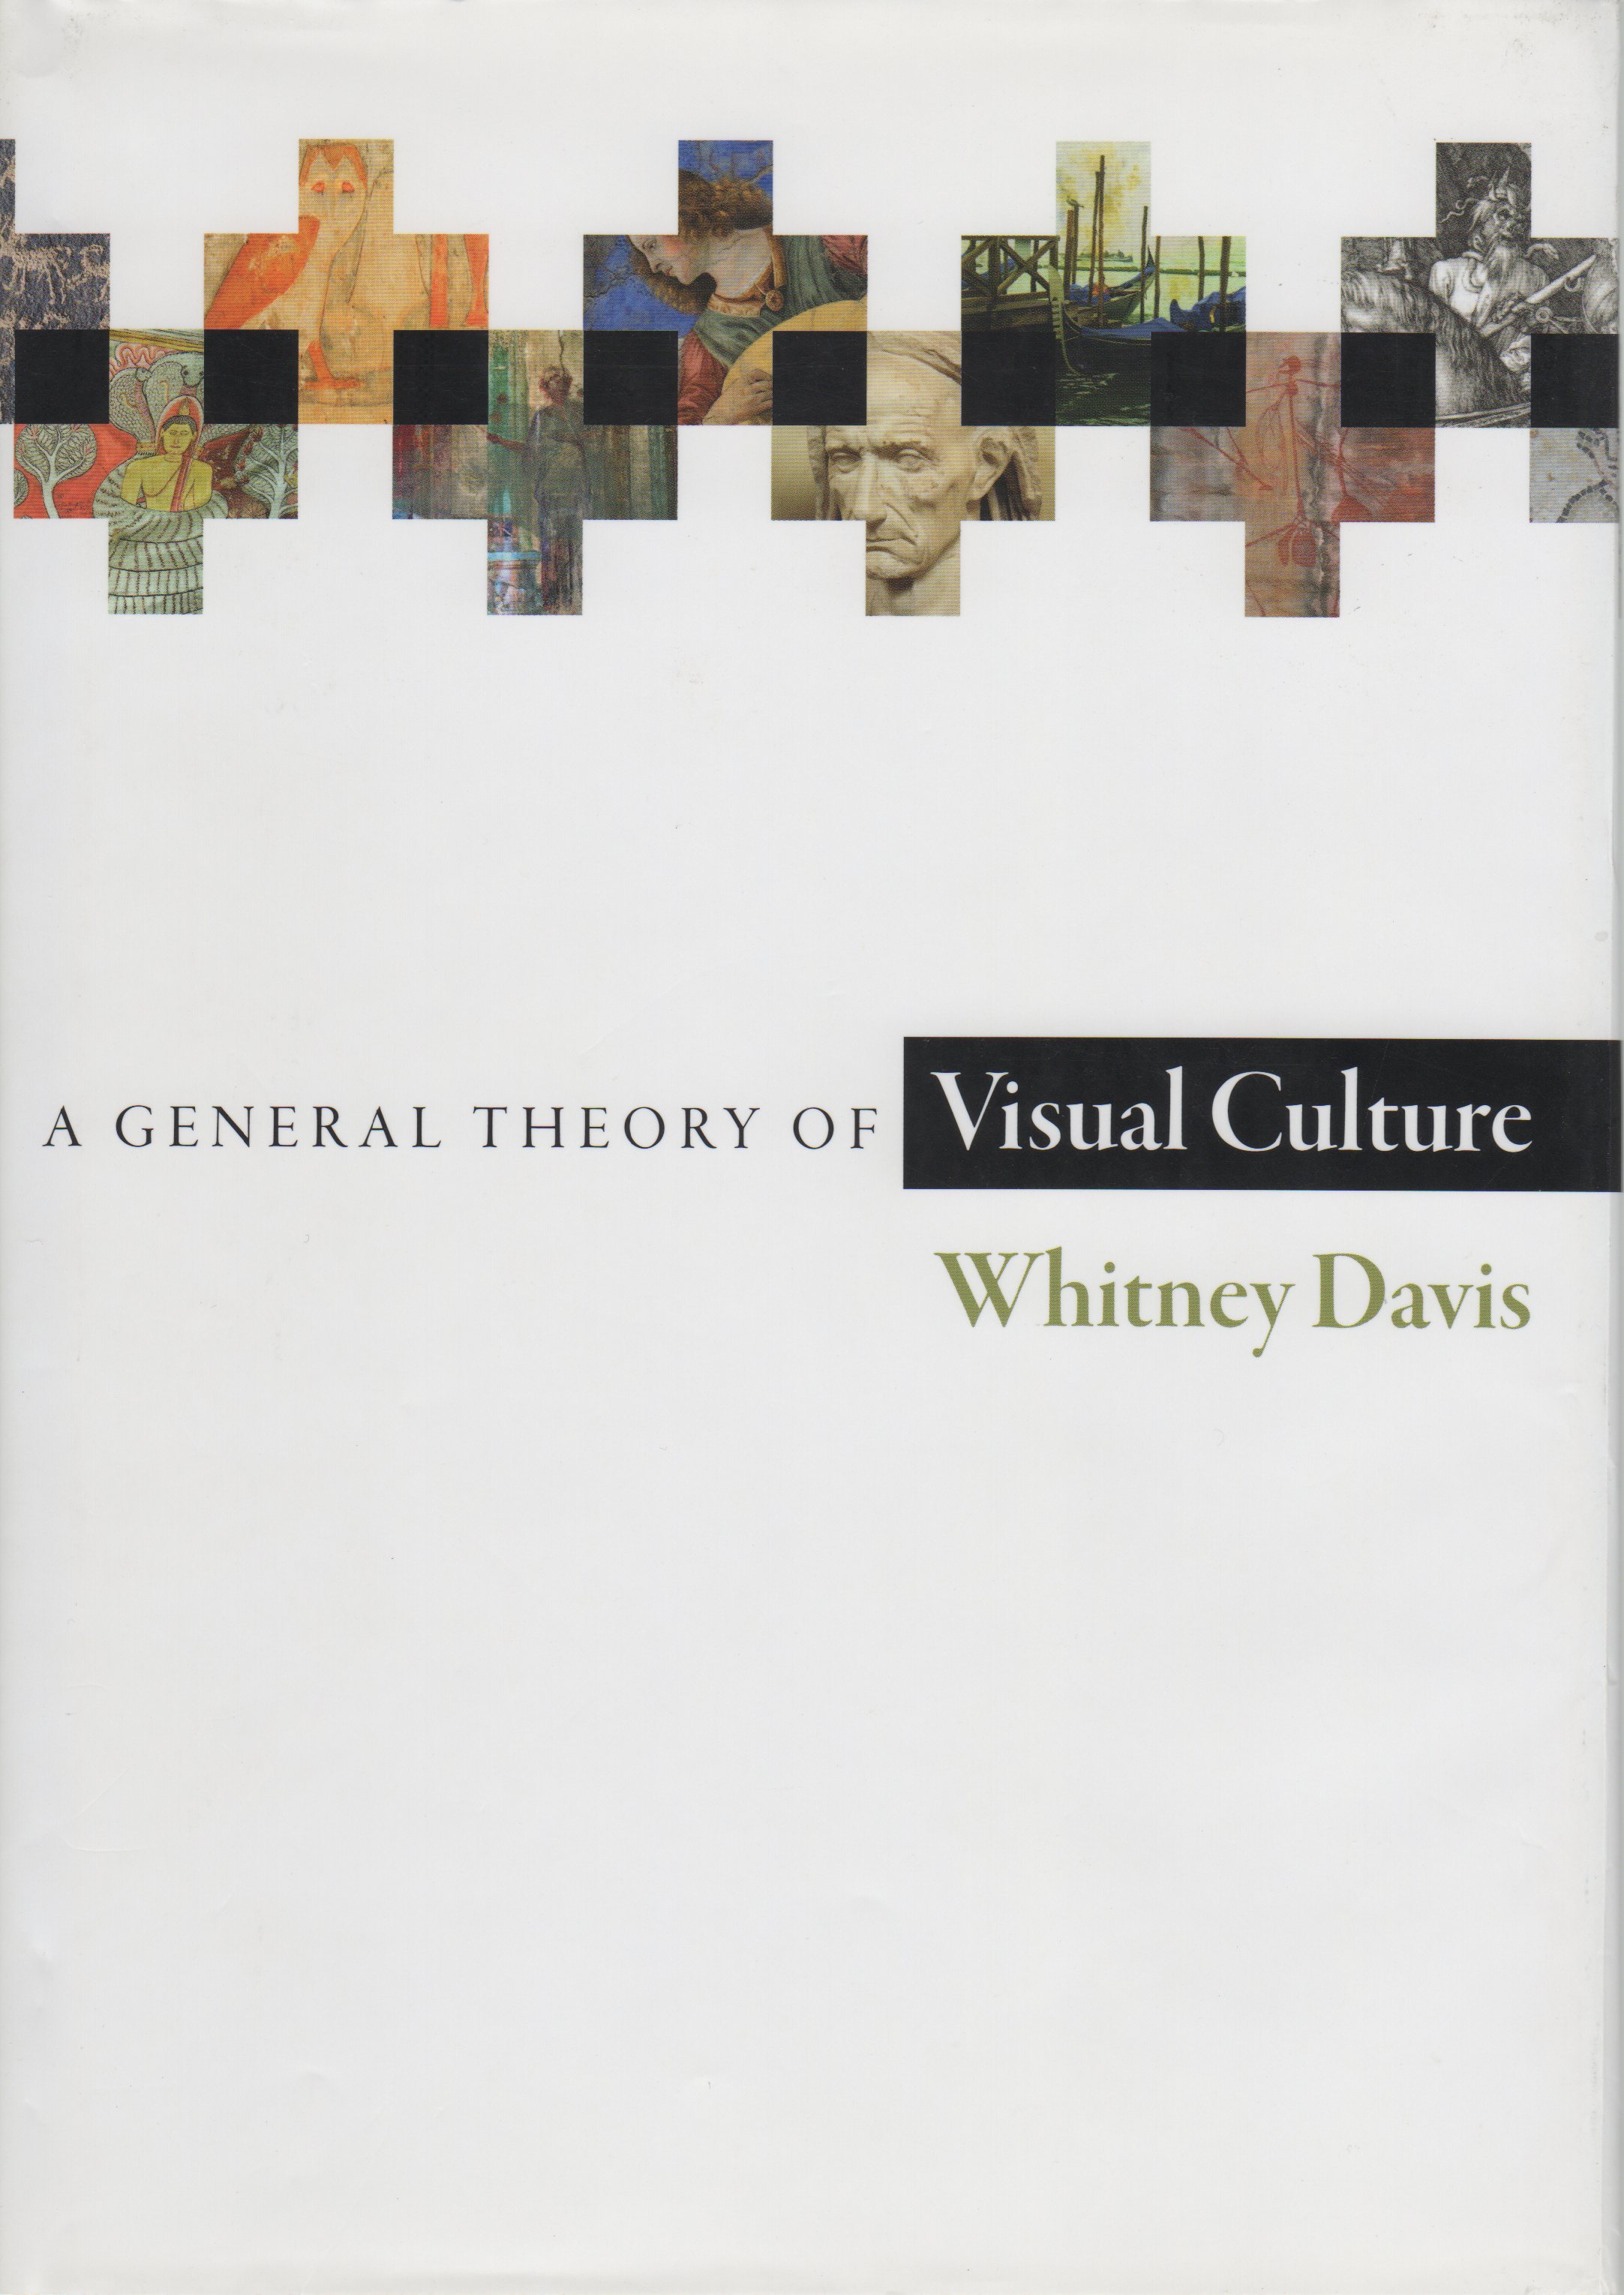 Cover of the book 'A General Theory of Visual Culture'